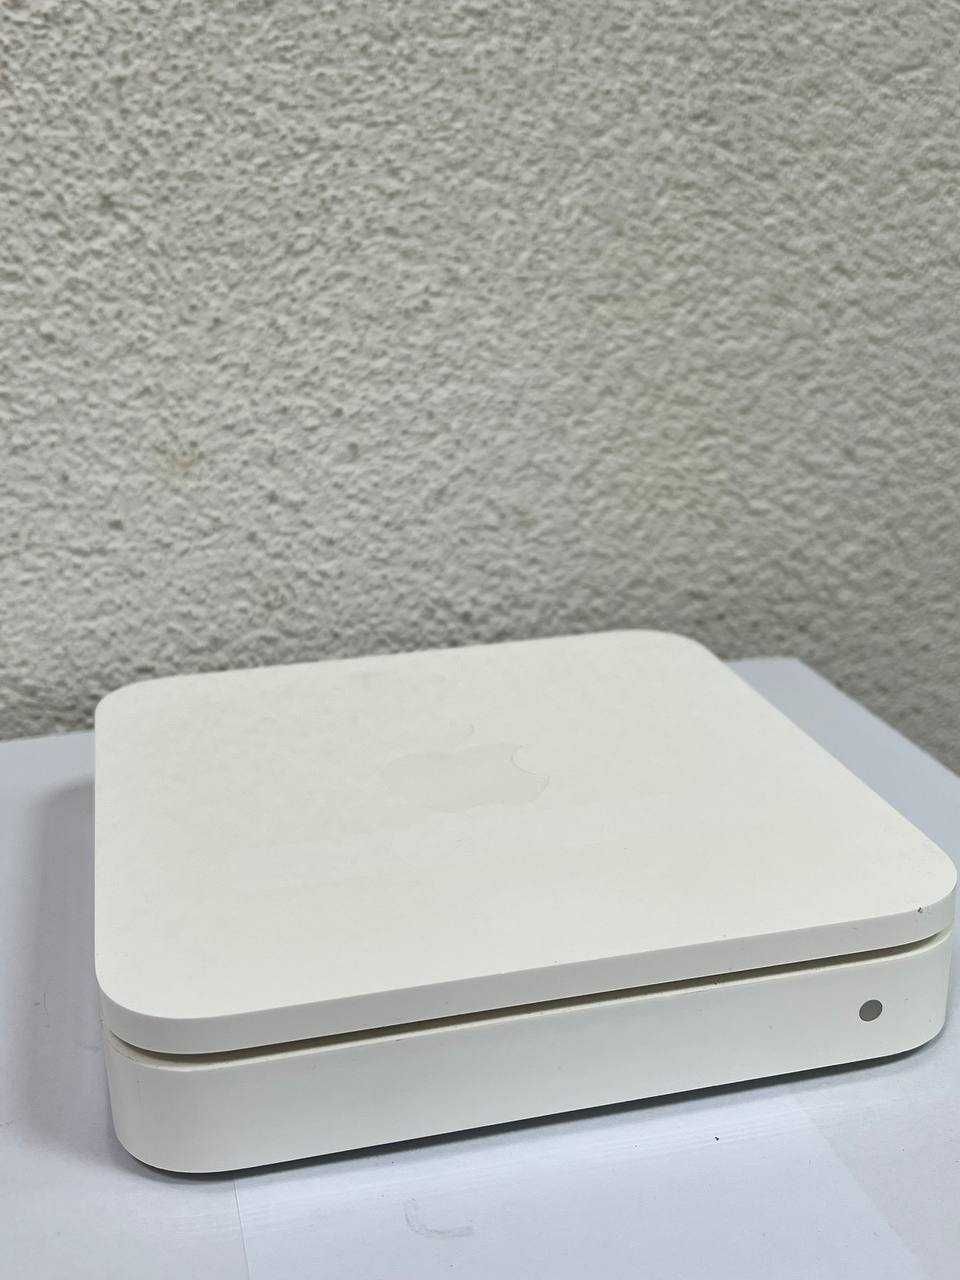 WI-FI Маршрутизатор AirPort Extreme A1408